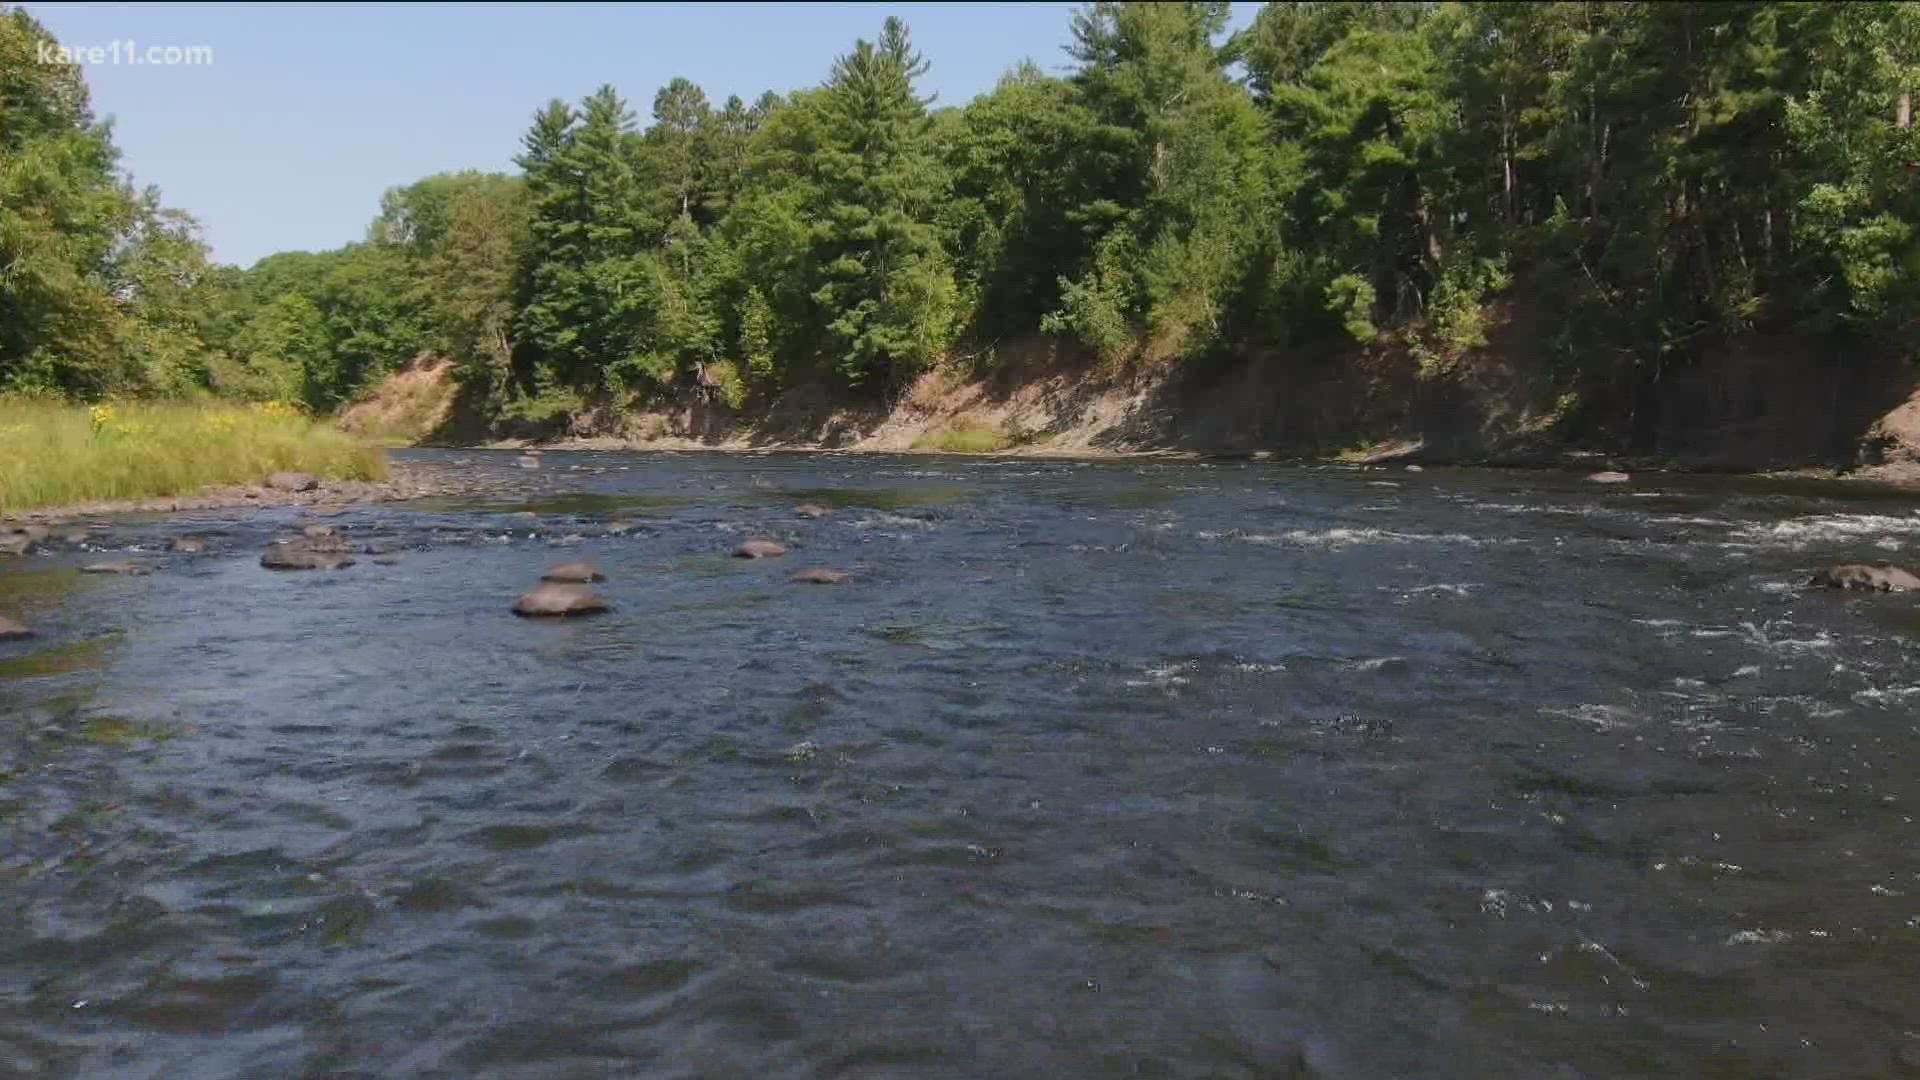 The largest state park has two rivers that run through it - the St. Croix and Kettle River.